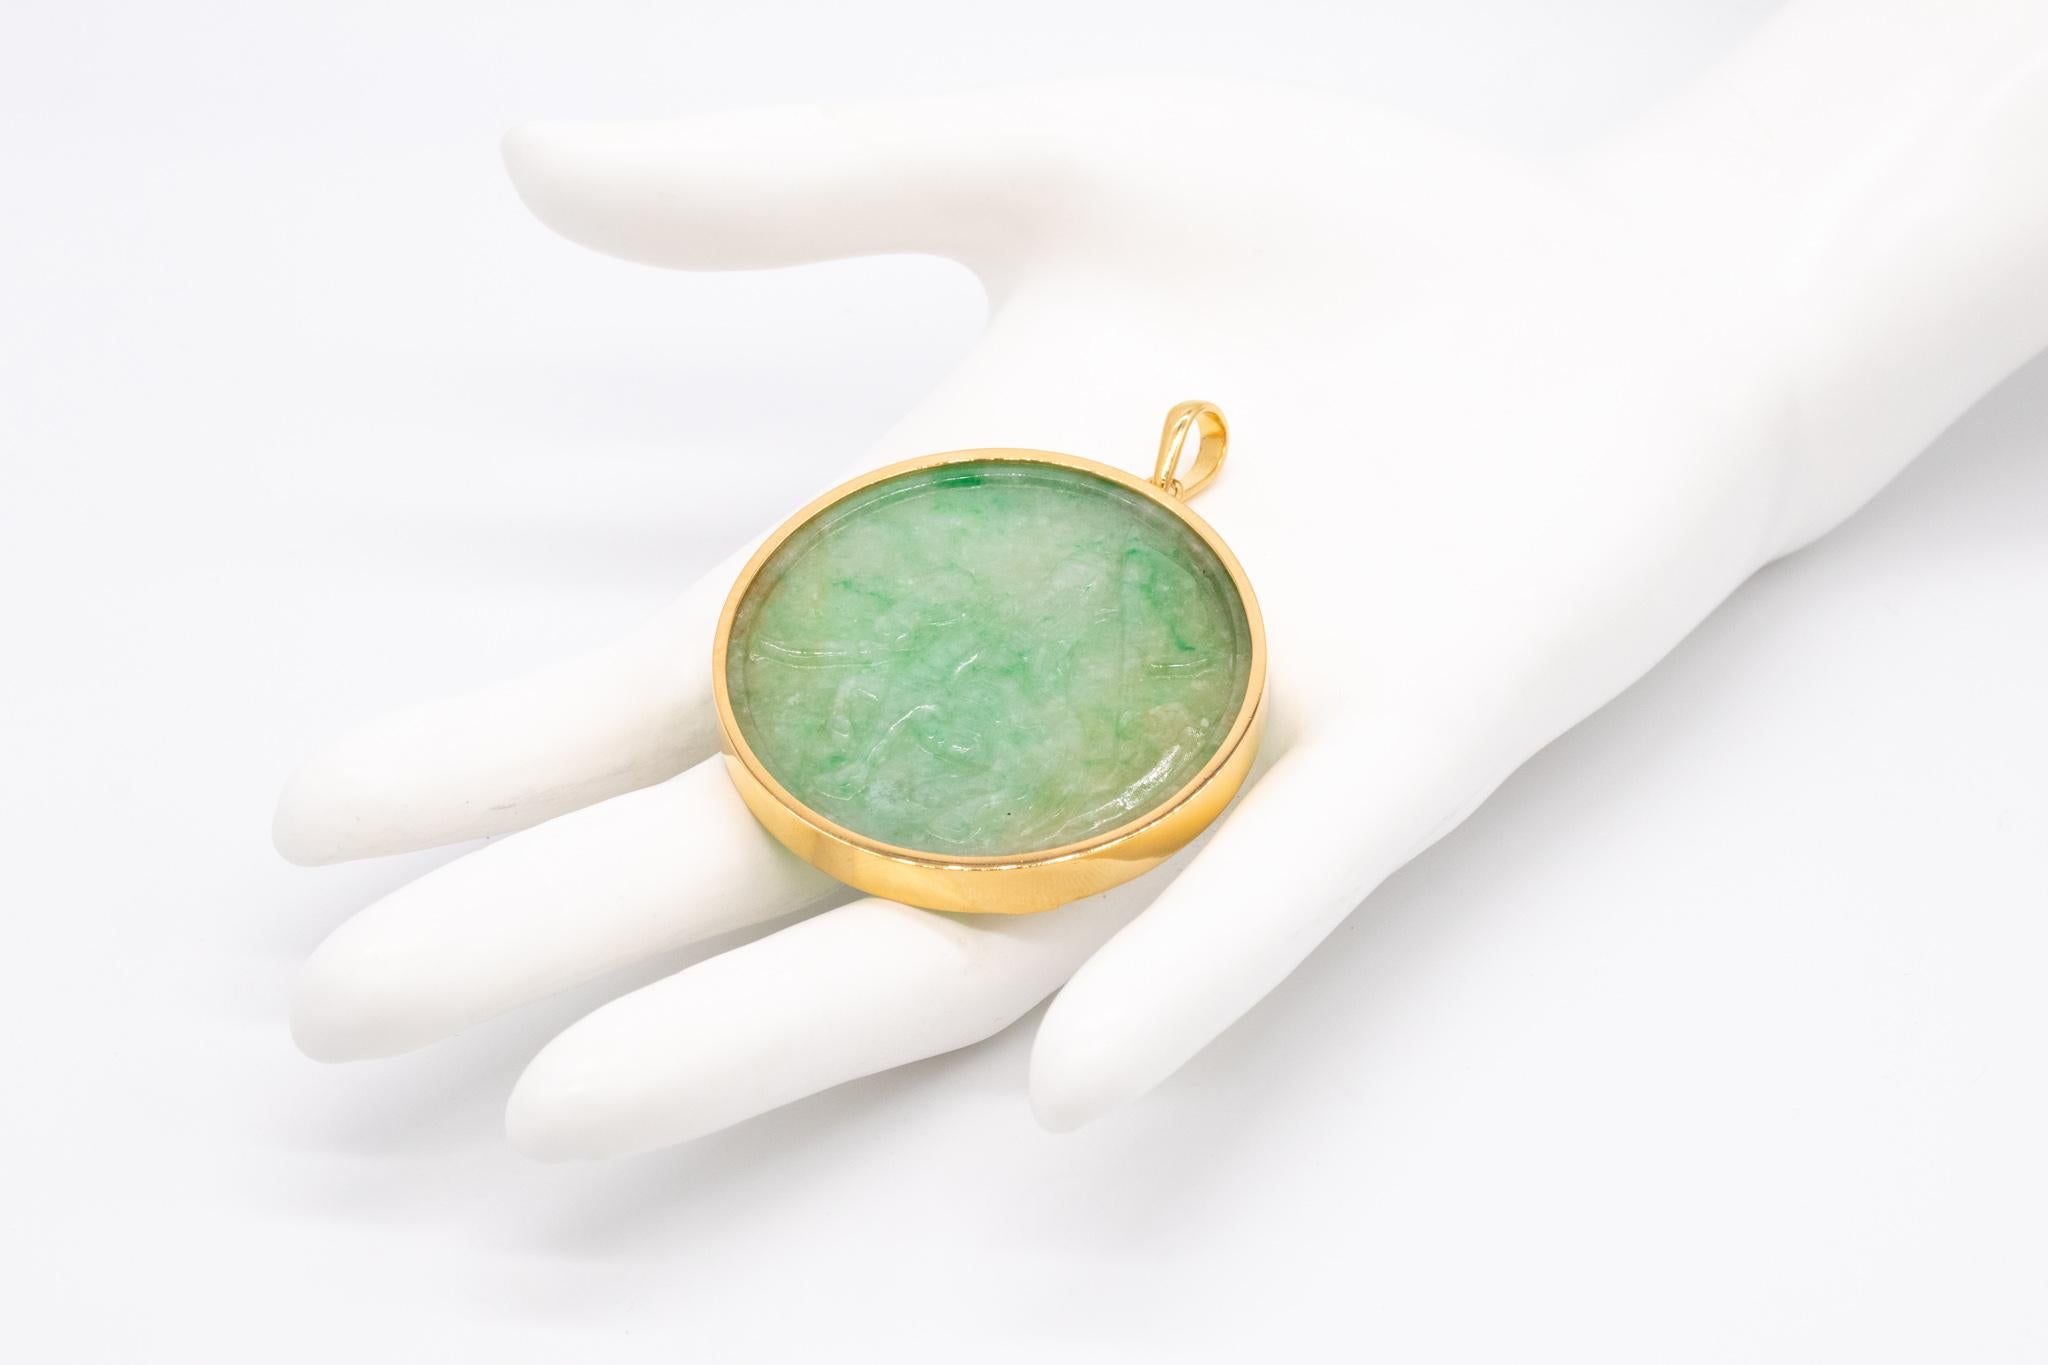 Magnificent Chinese pendant with carving of Jadeite Green Jade.

A beautiful piece of carved jade mounted in jewelry. The jade is carved from a single piece and set in a custom made frame mounting, crafted in solid yellow gold of 18 karats, with